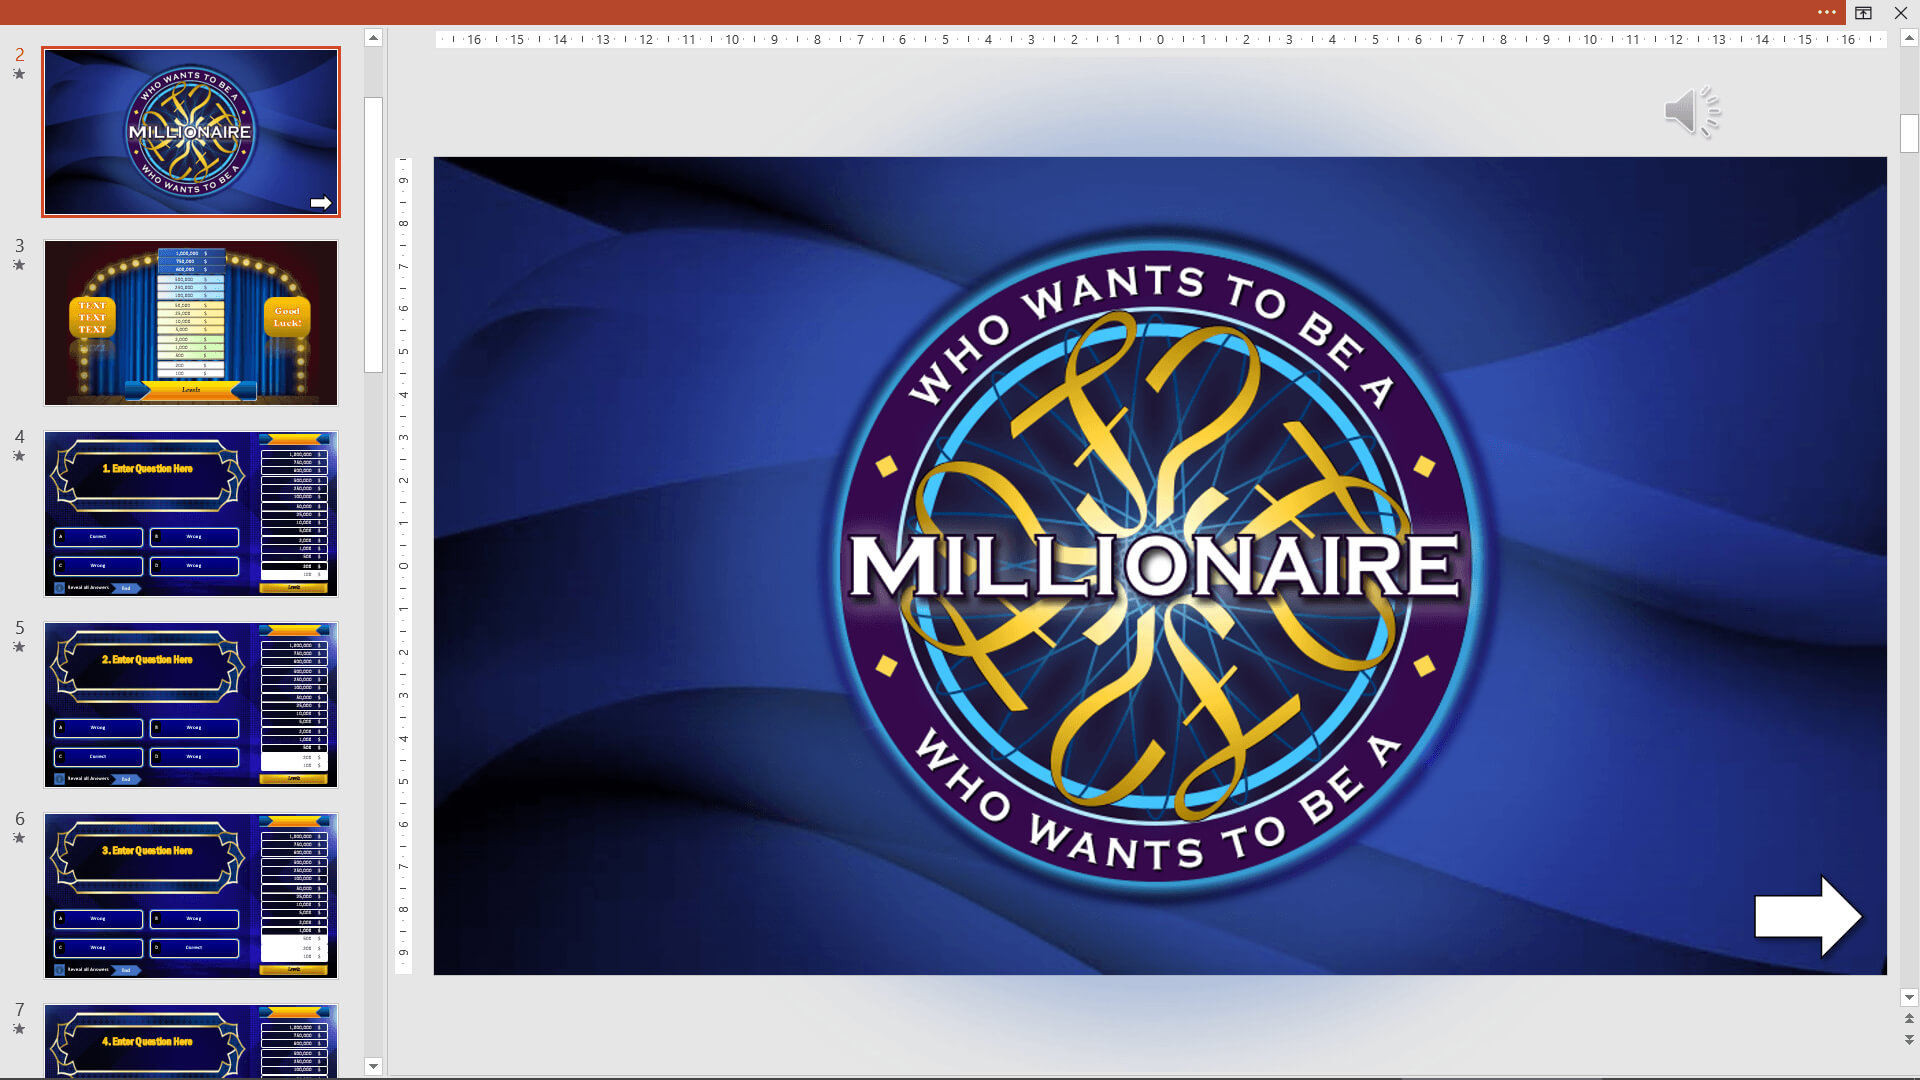 Who Wants To Be A Millionaire? – Powerpoint Vba Game Inside Who Wants To Be A Millionaire Powerpoint Template